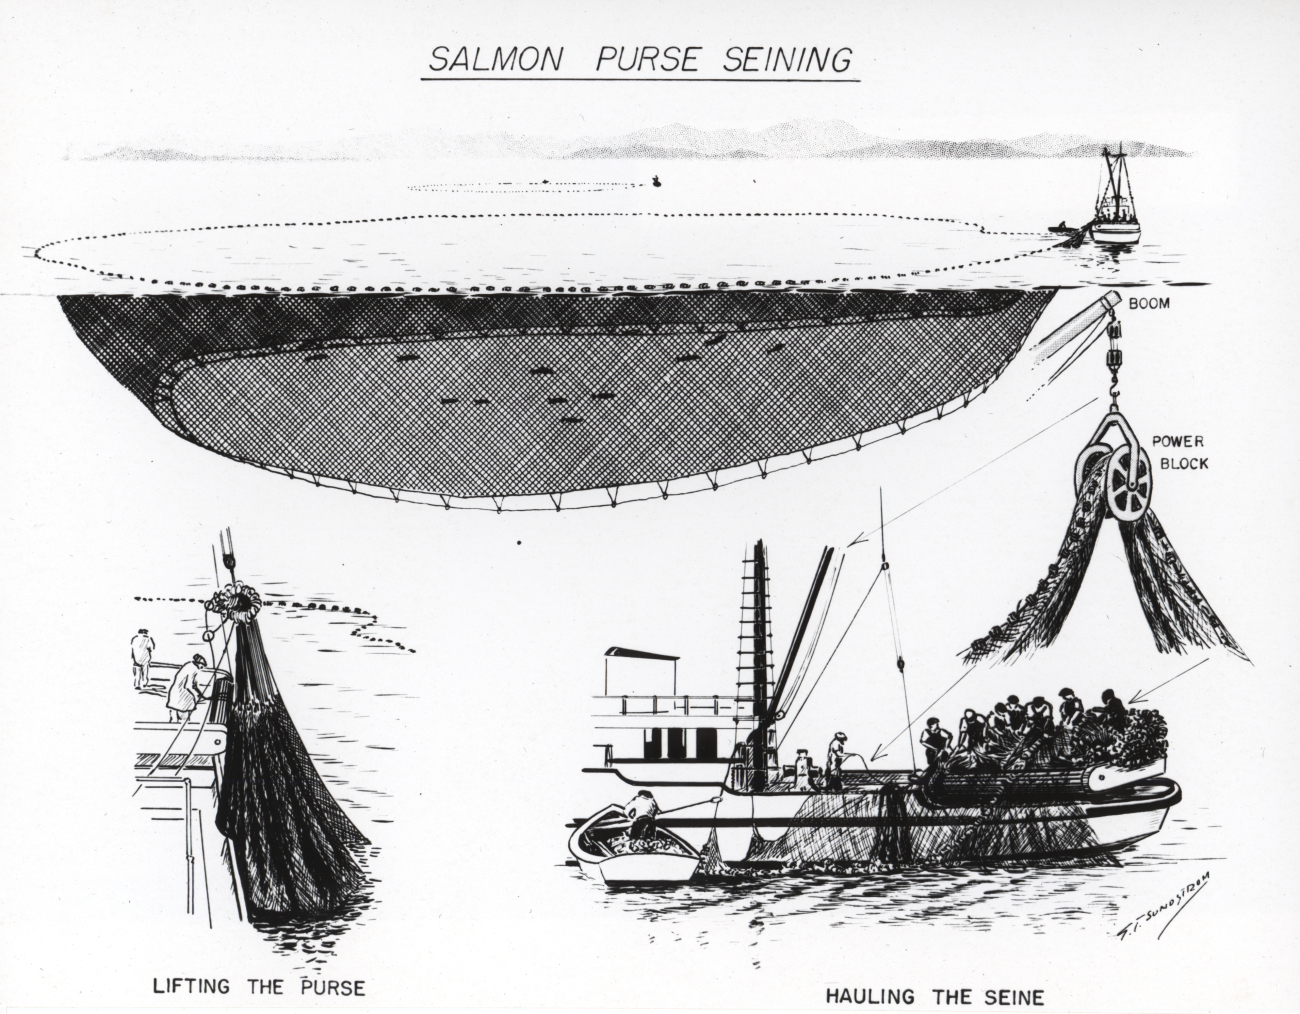 Diagram of salmon purse seining by S